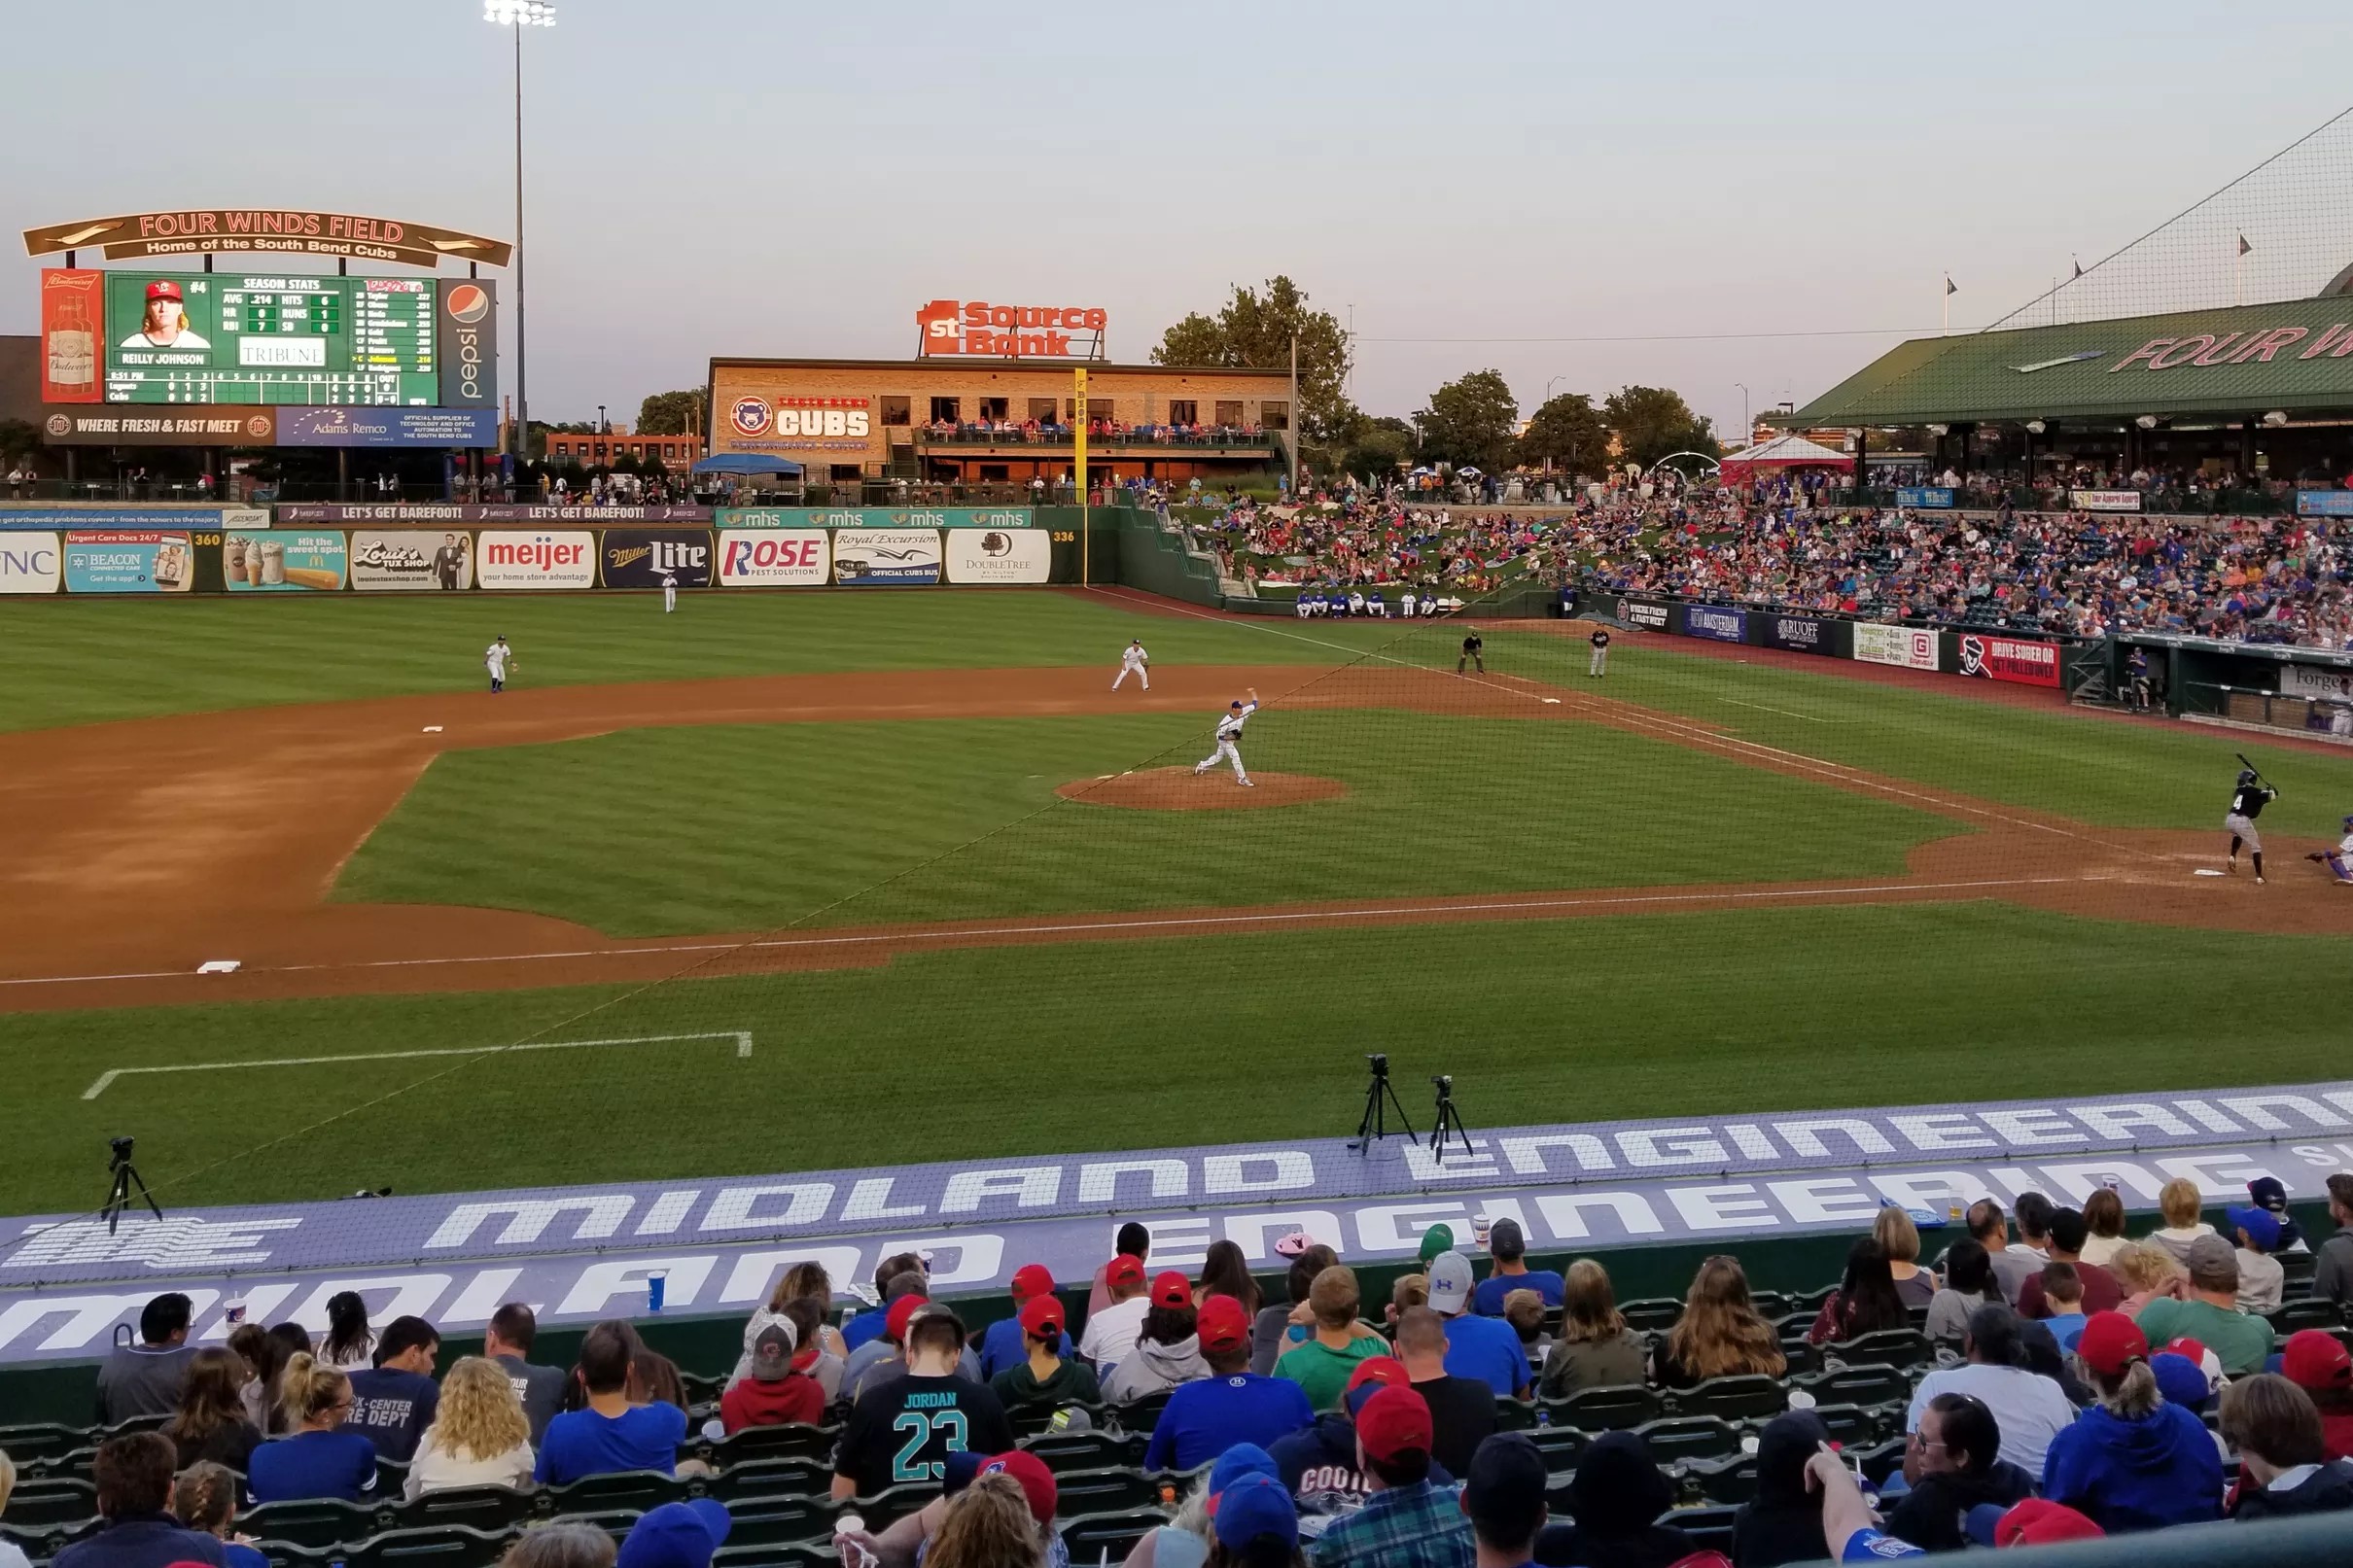 More rule changes are coming to Minor League Baseball